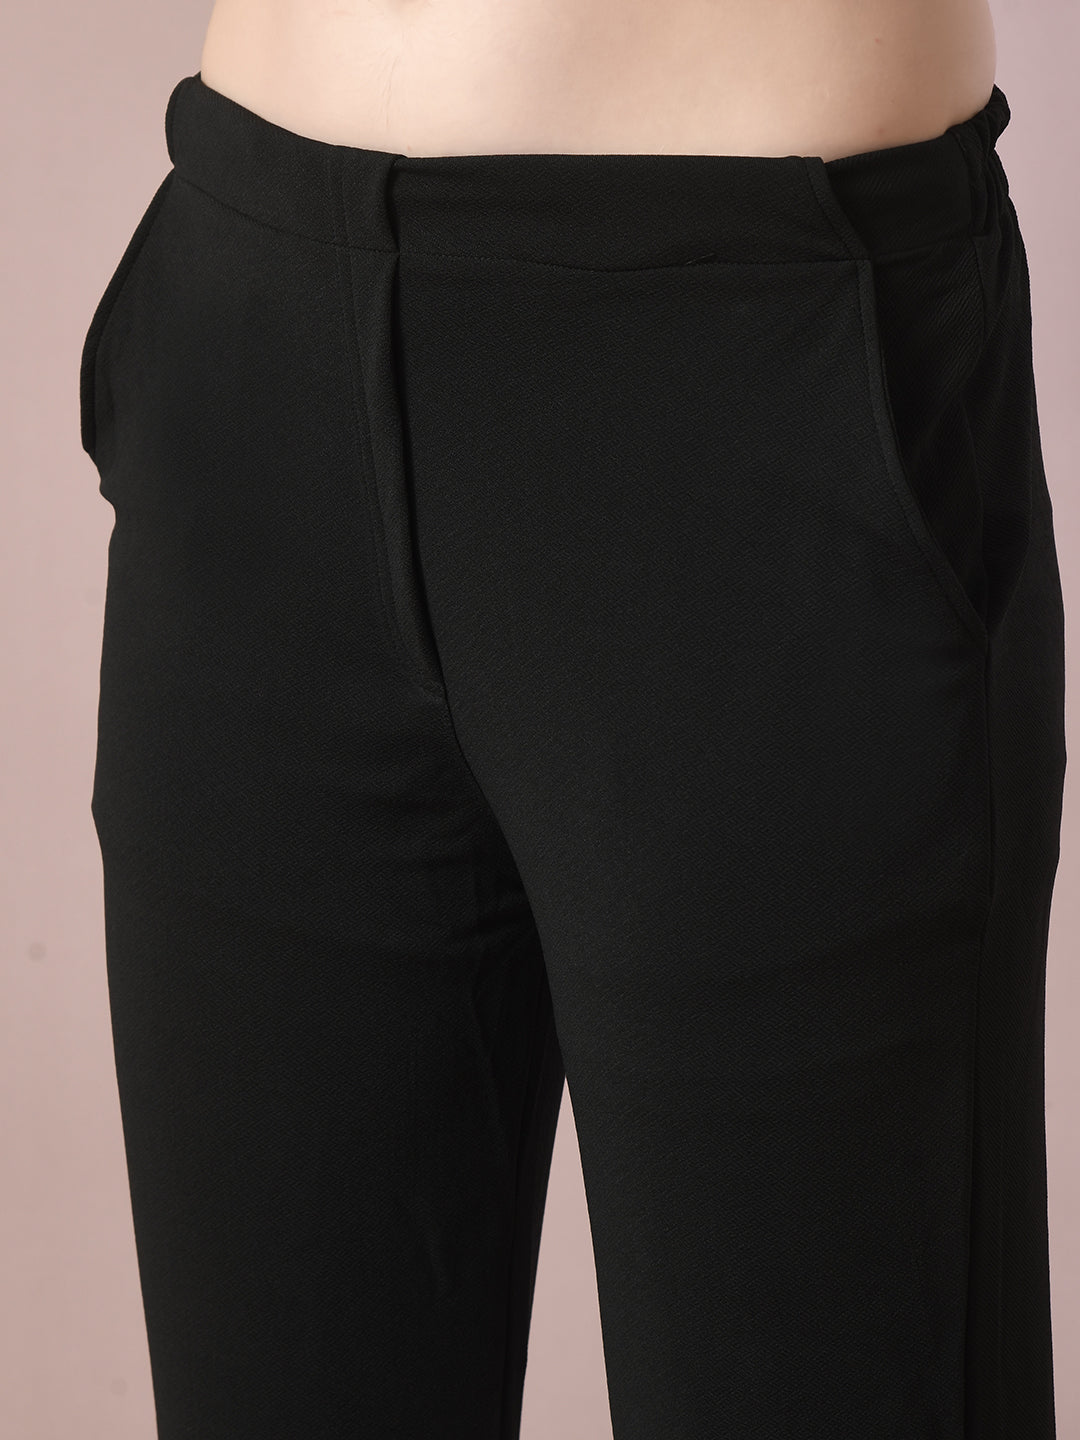 Women's Black Solid Party Straight Trousers - Myshka